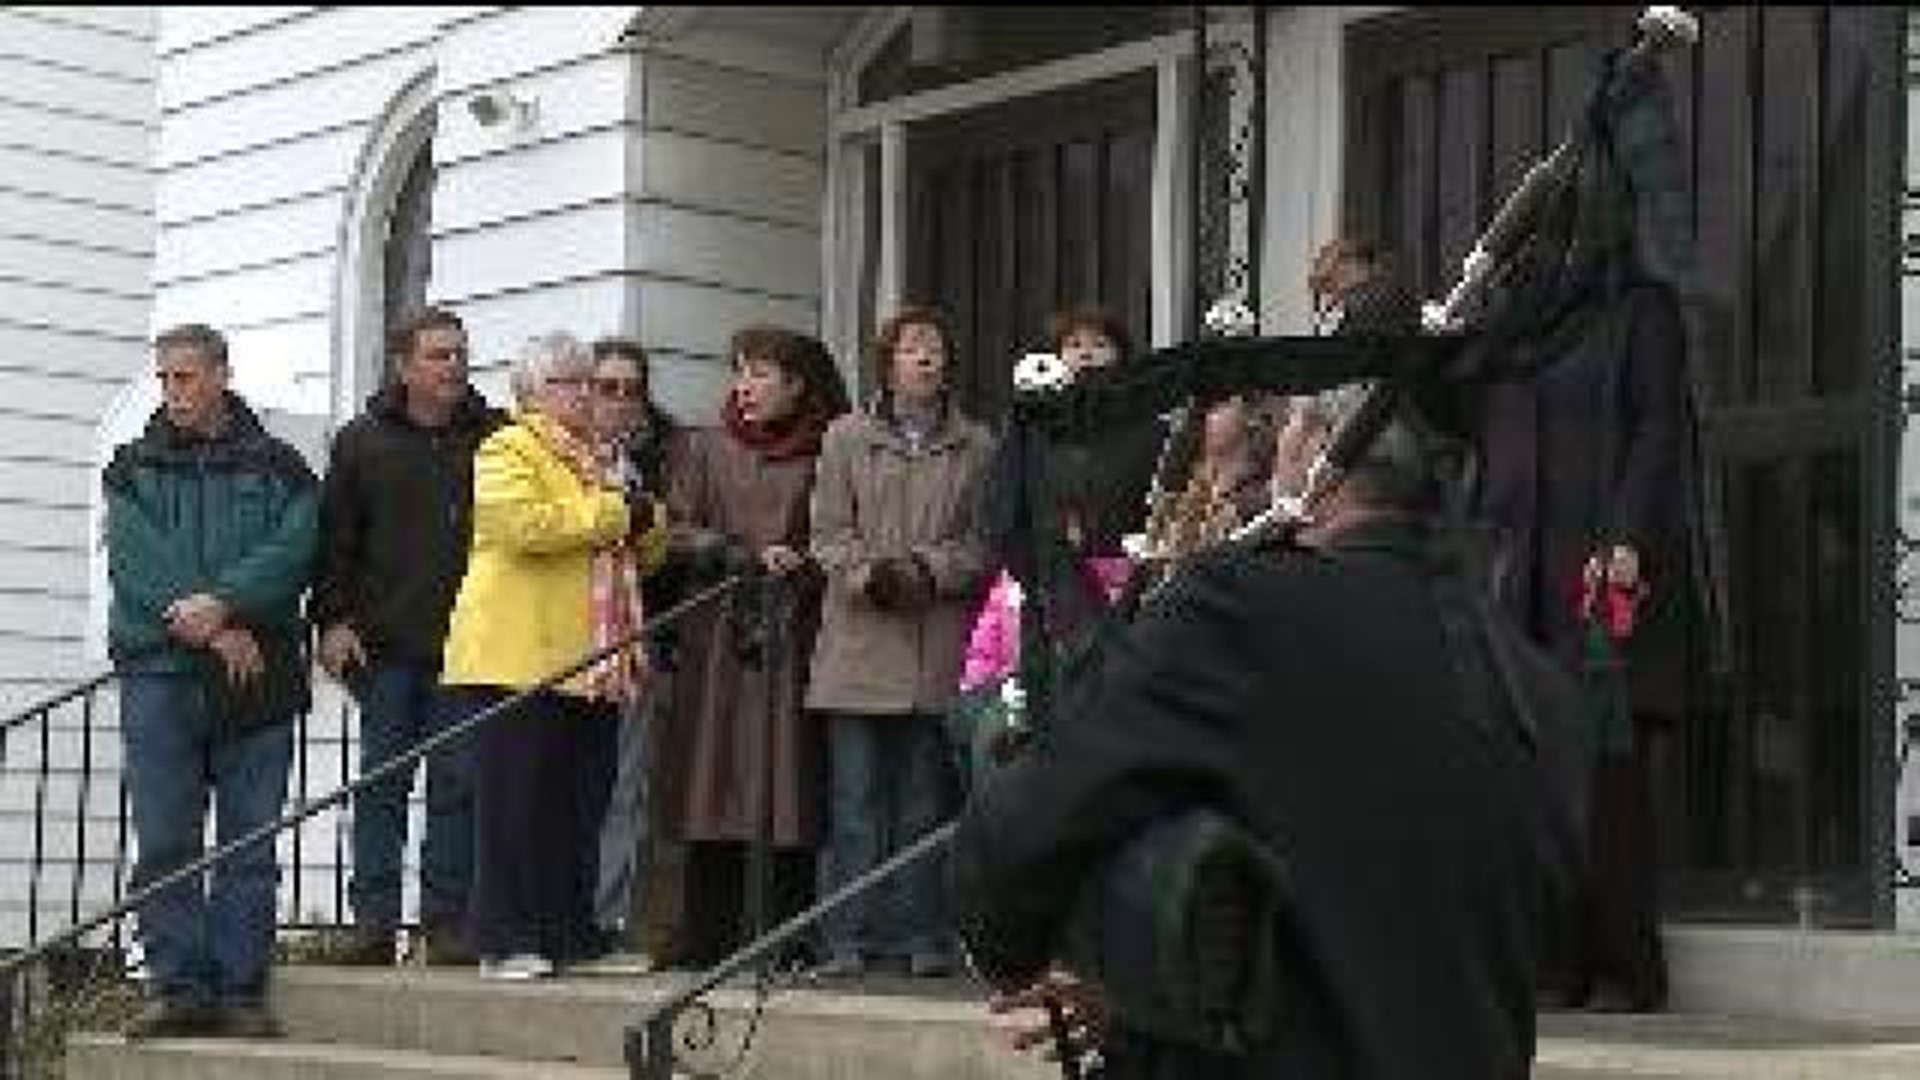 Former Parishioners Say Final Goodbye To Church Scheduled For Demolition